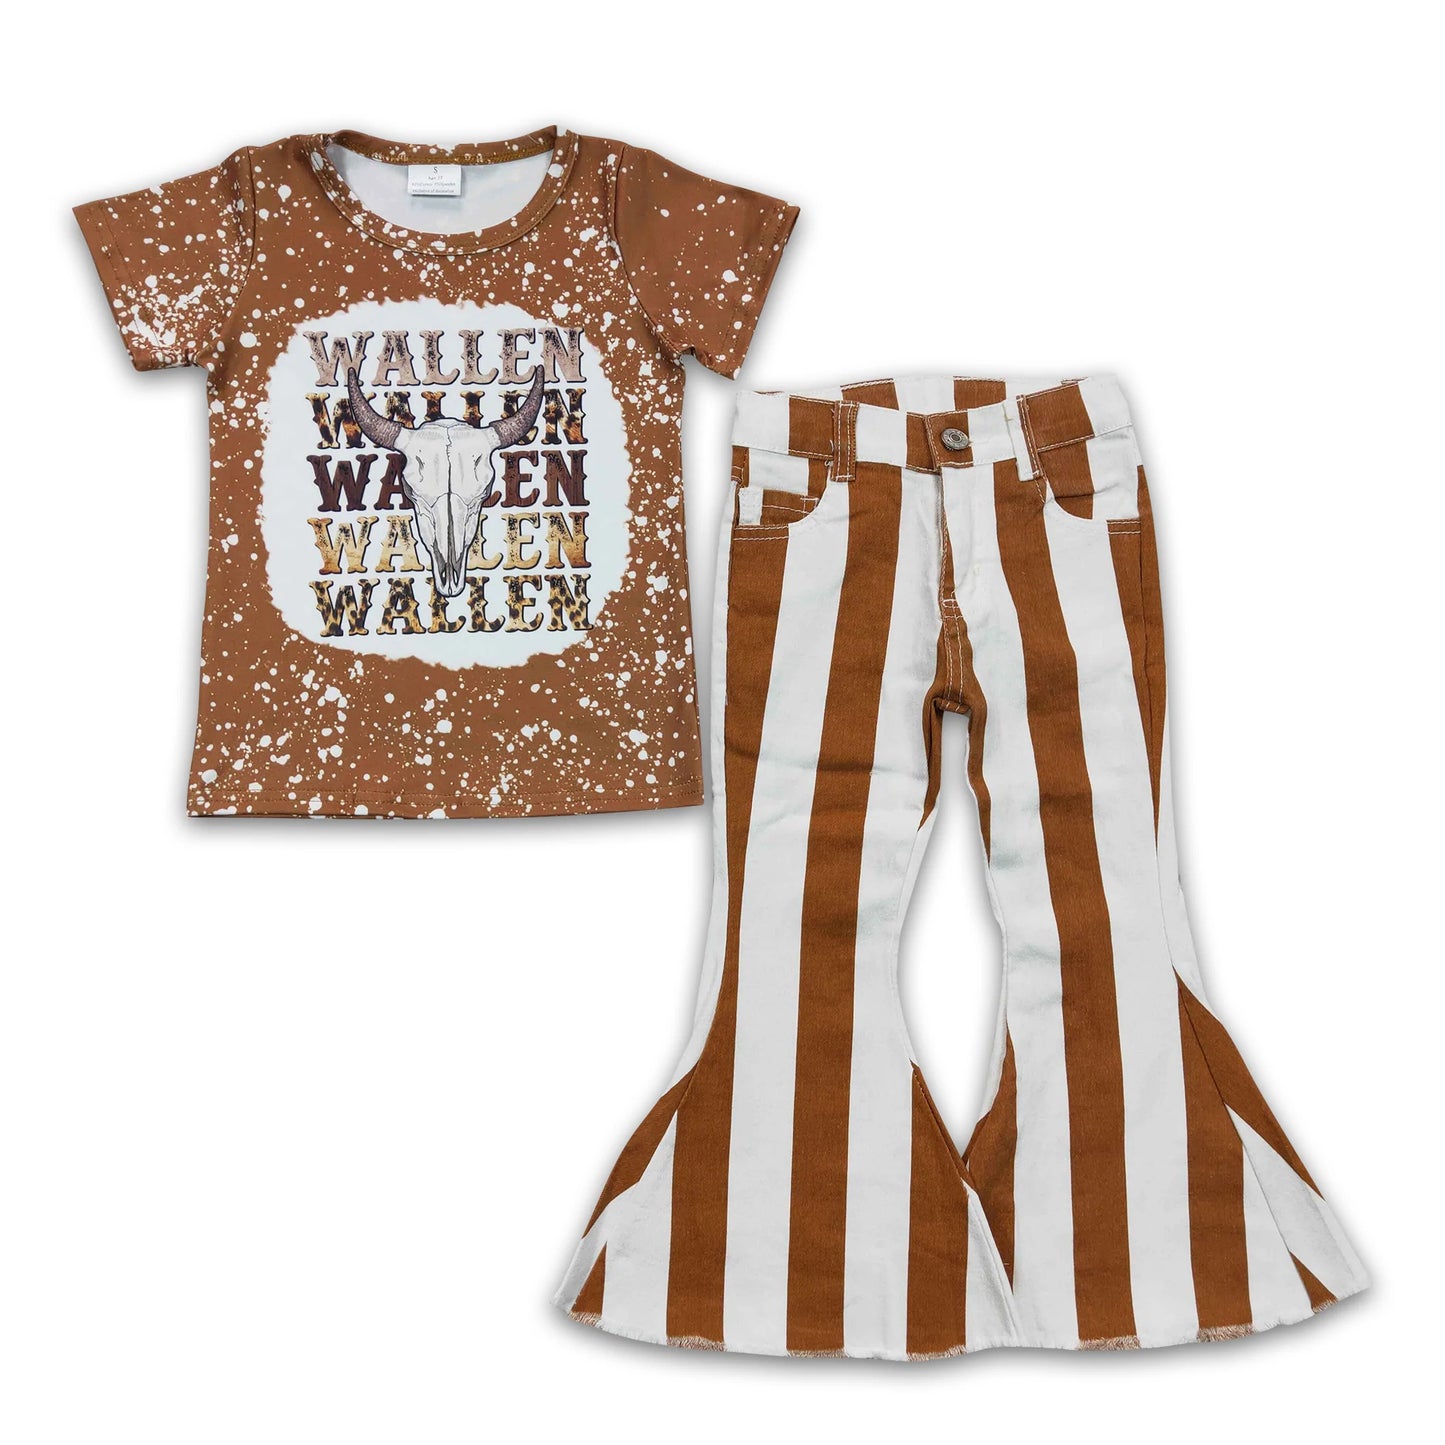 Bull skull bleached shirt brown stripe jeans girls outfits